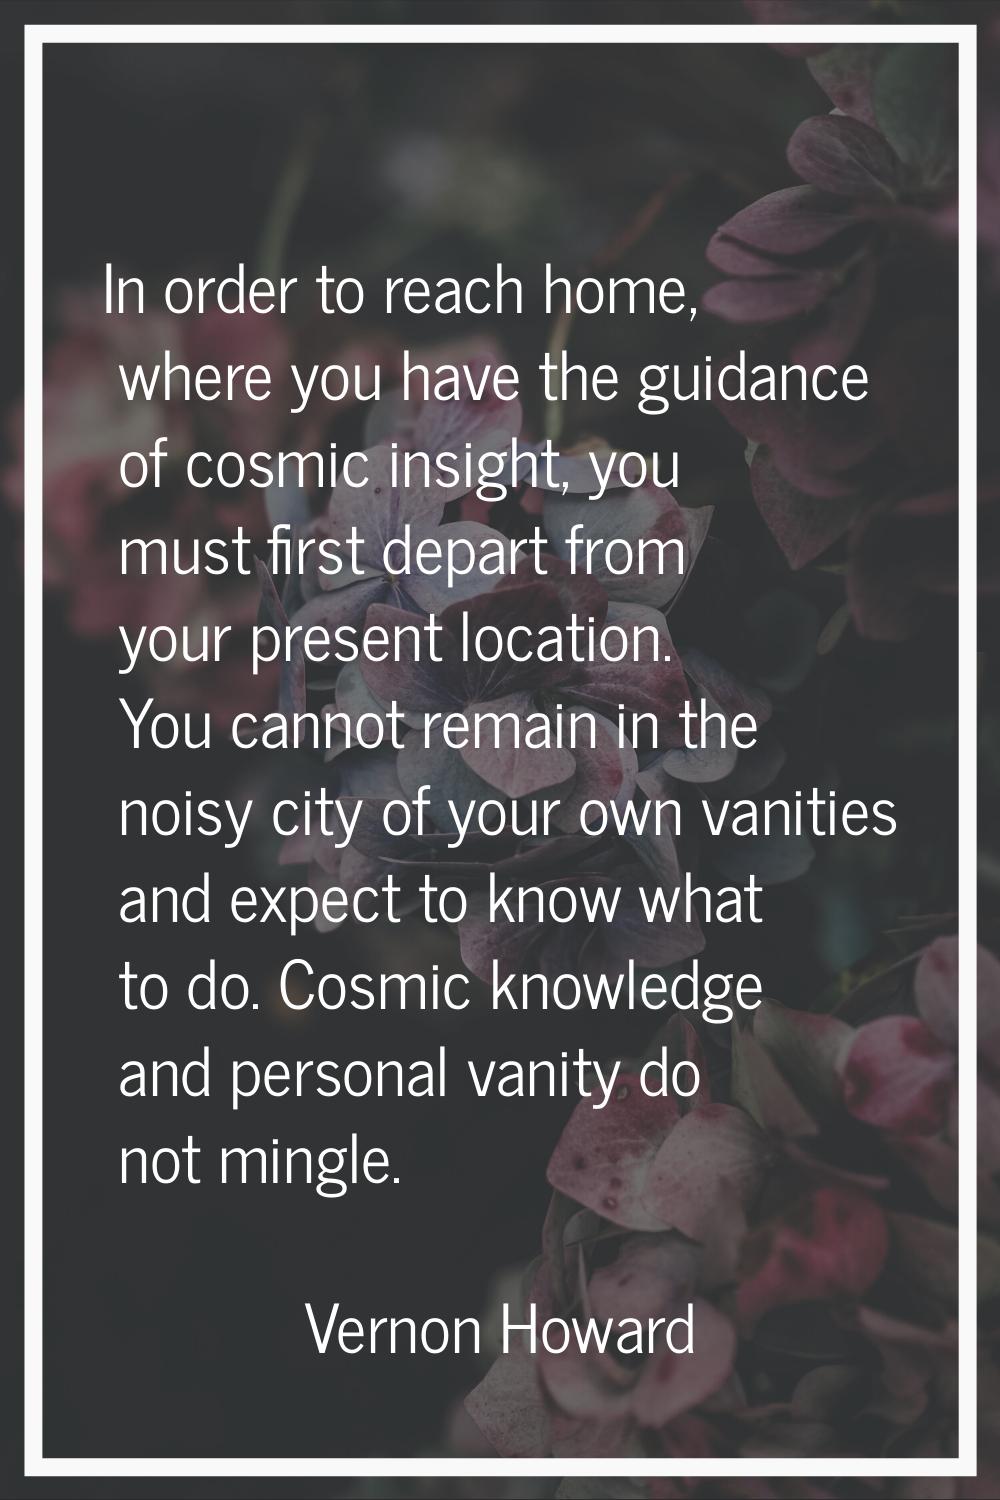 In order to reach home, where you have the guidance of cosmic insight, you must first depart from y